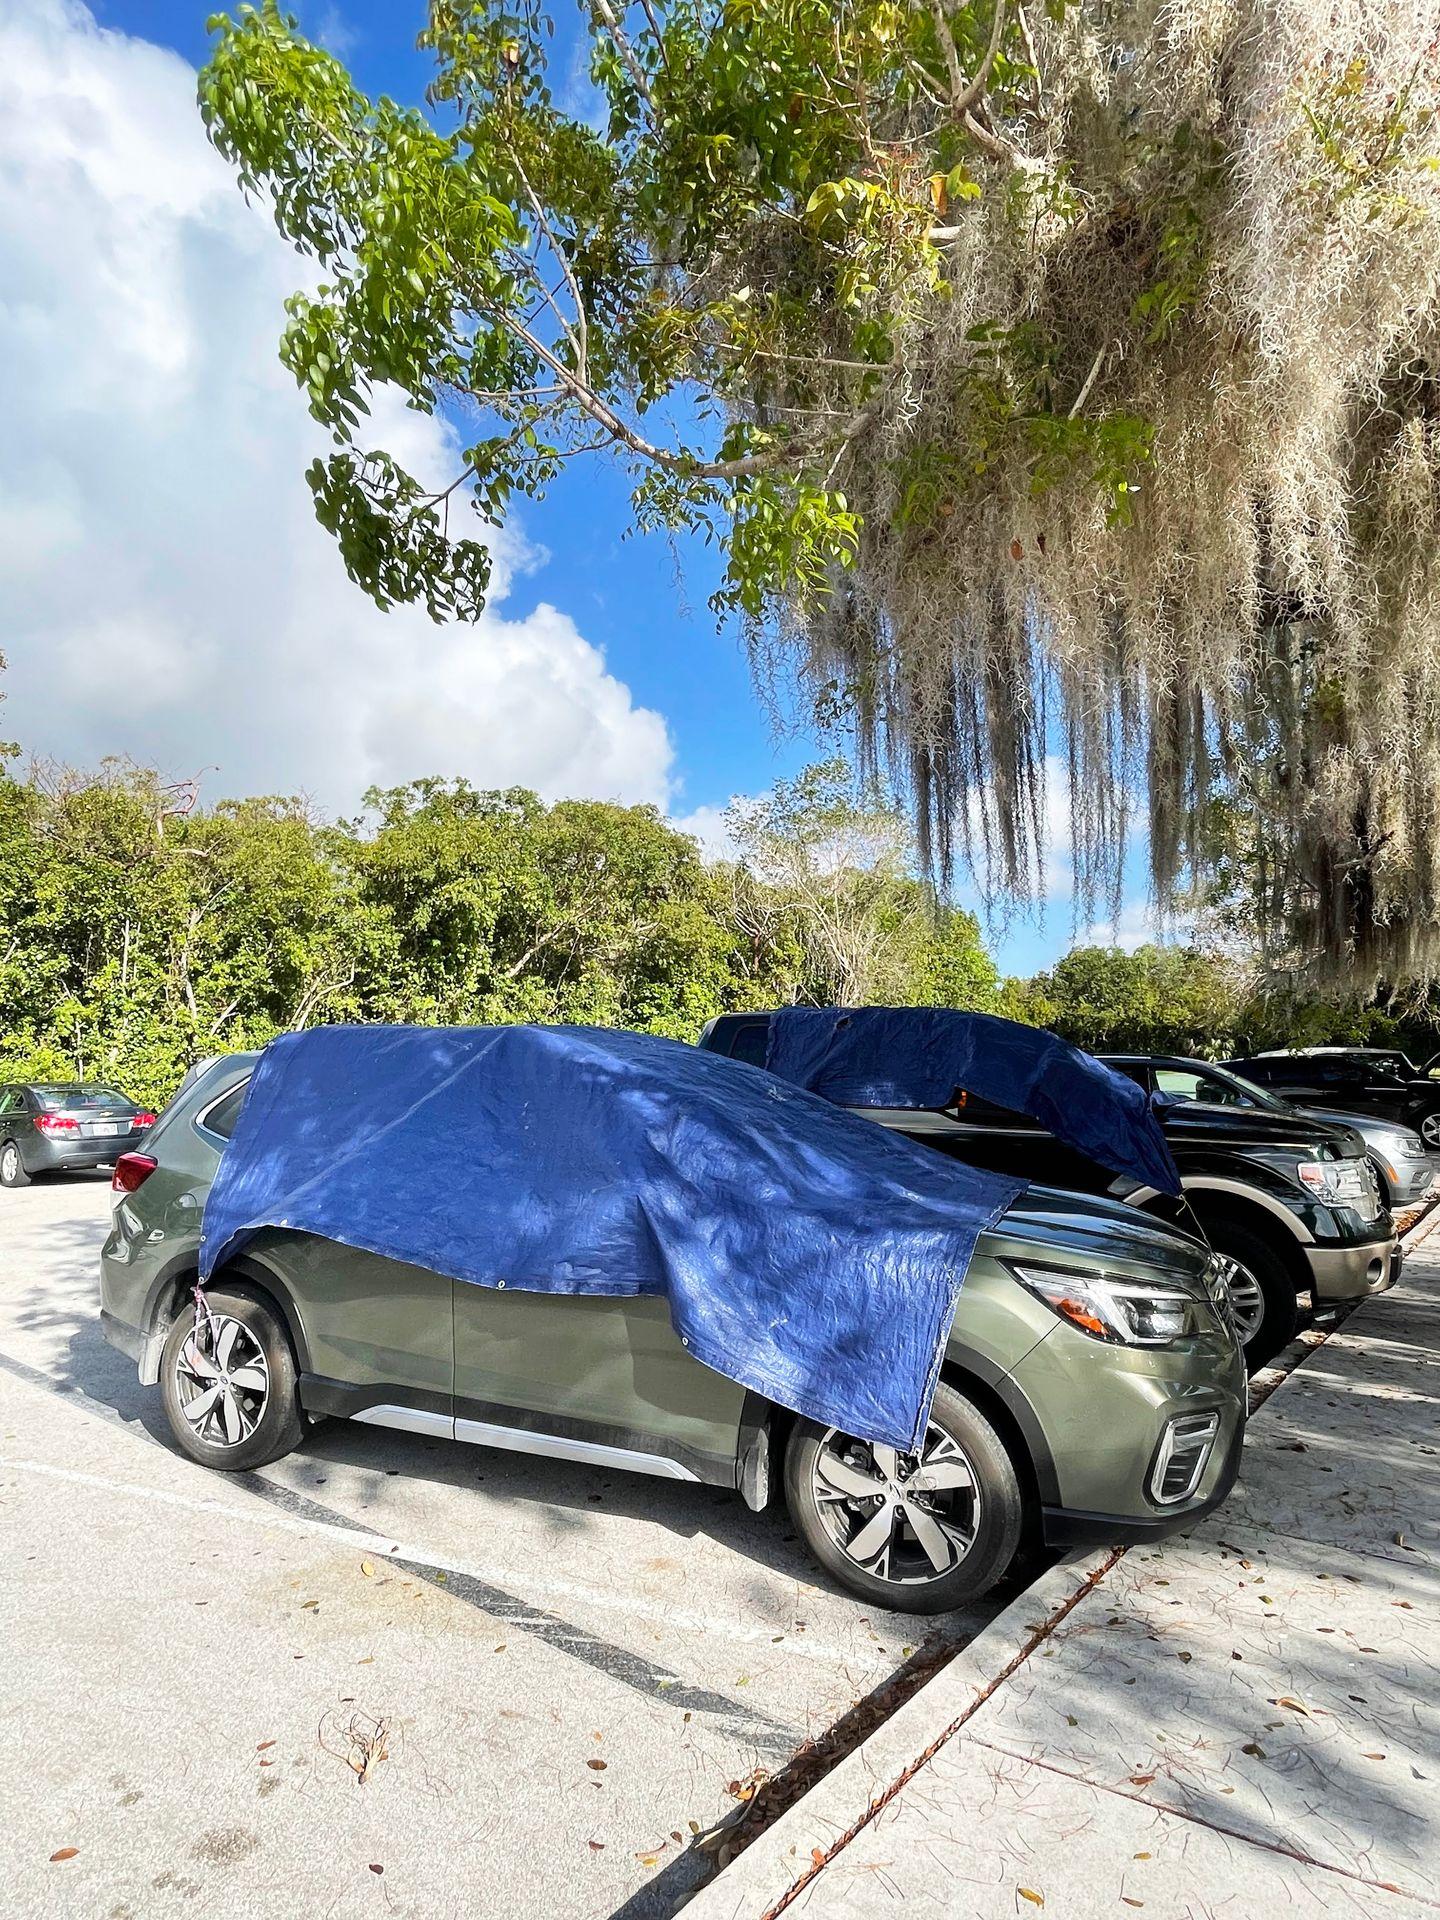 Two cars parked in the Royal Palm Visitor Center parking lot with blue tarps over them.